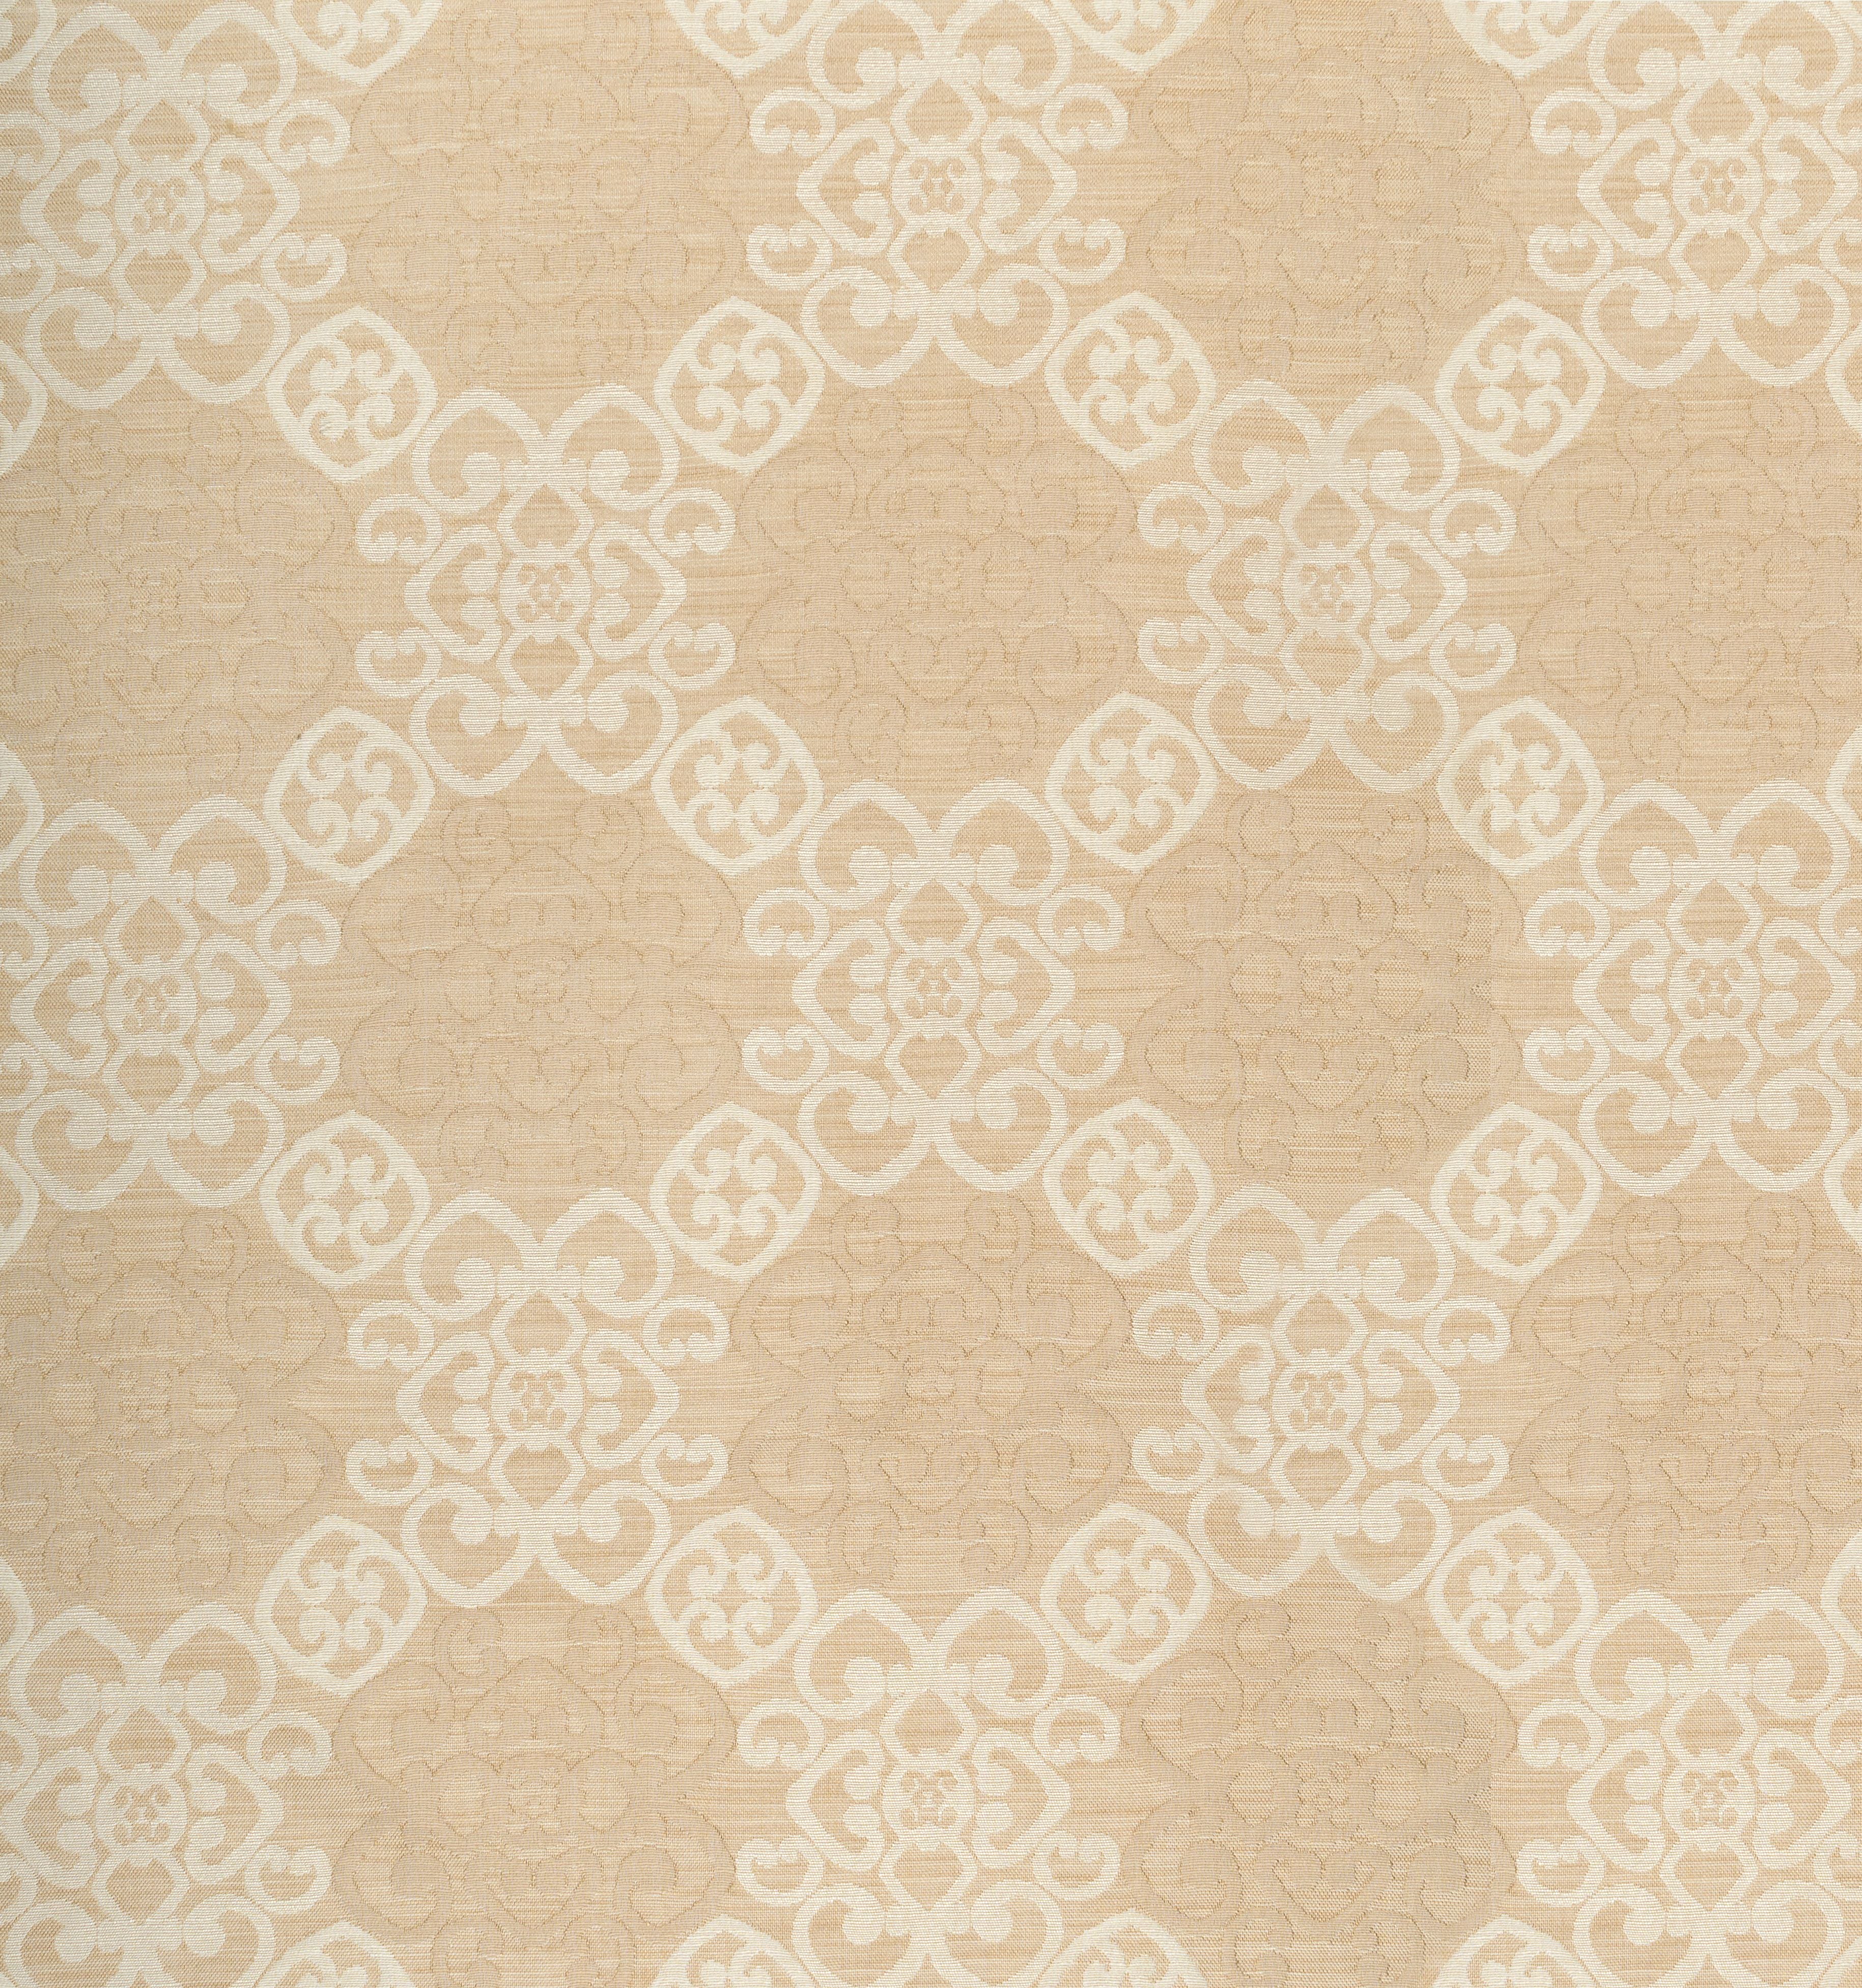 Charlevoix fabric in light tan color - pattern number M8 00019138 - by Scalamandre in the Old World Weavers collection